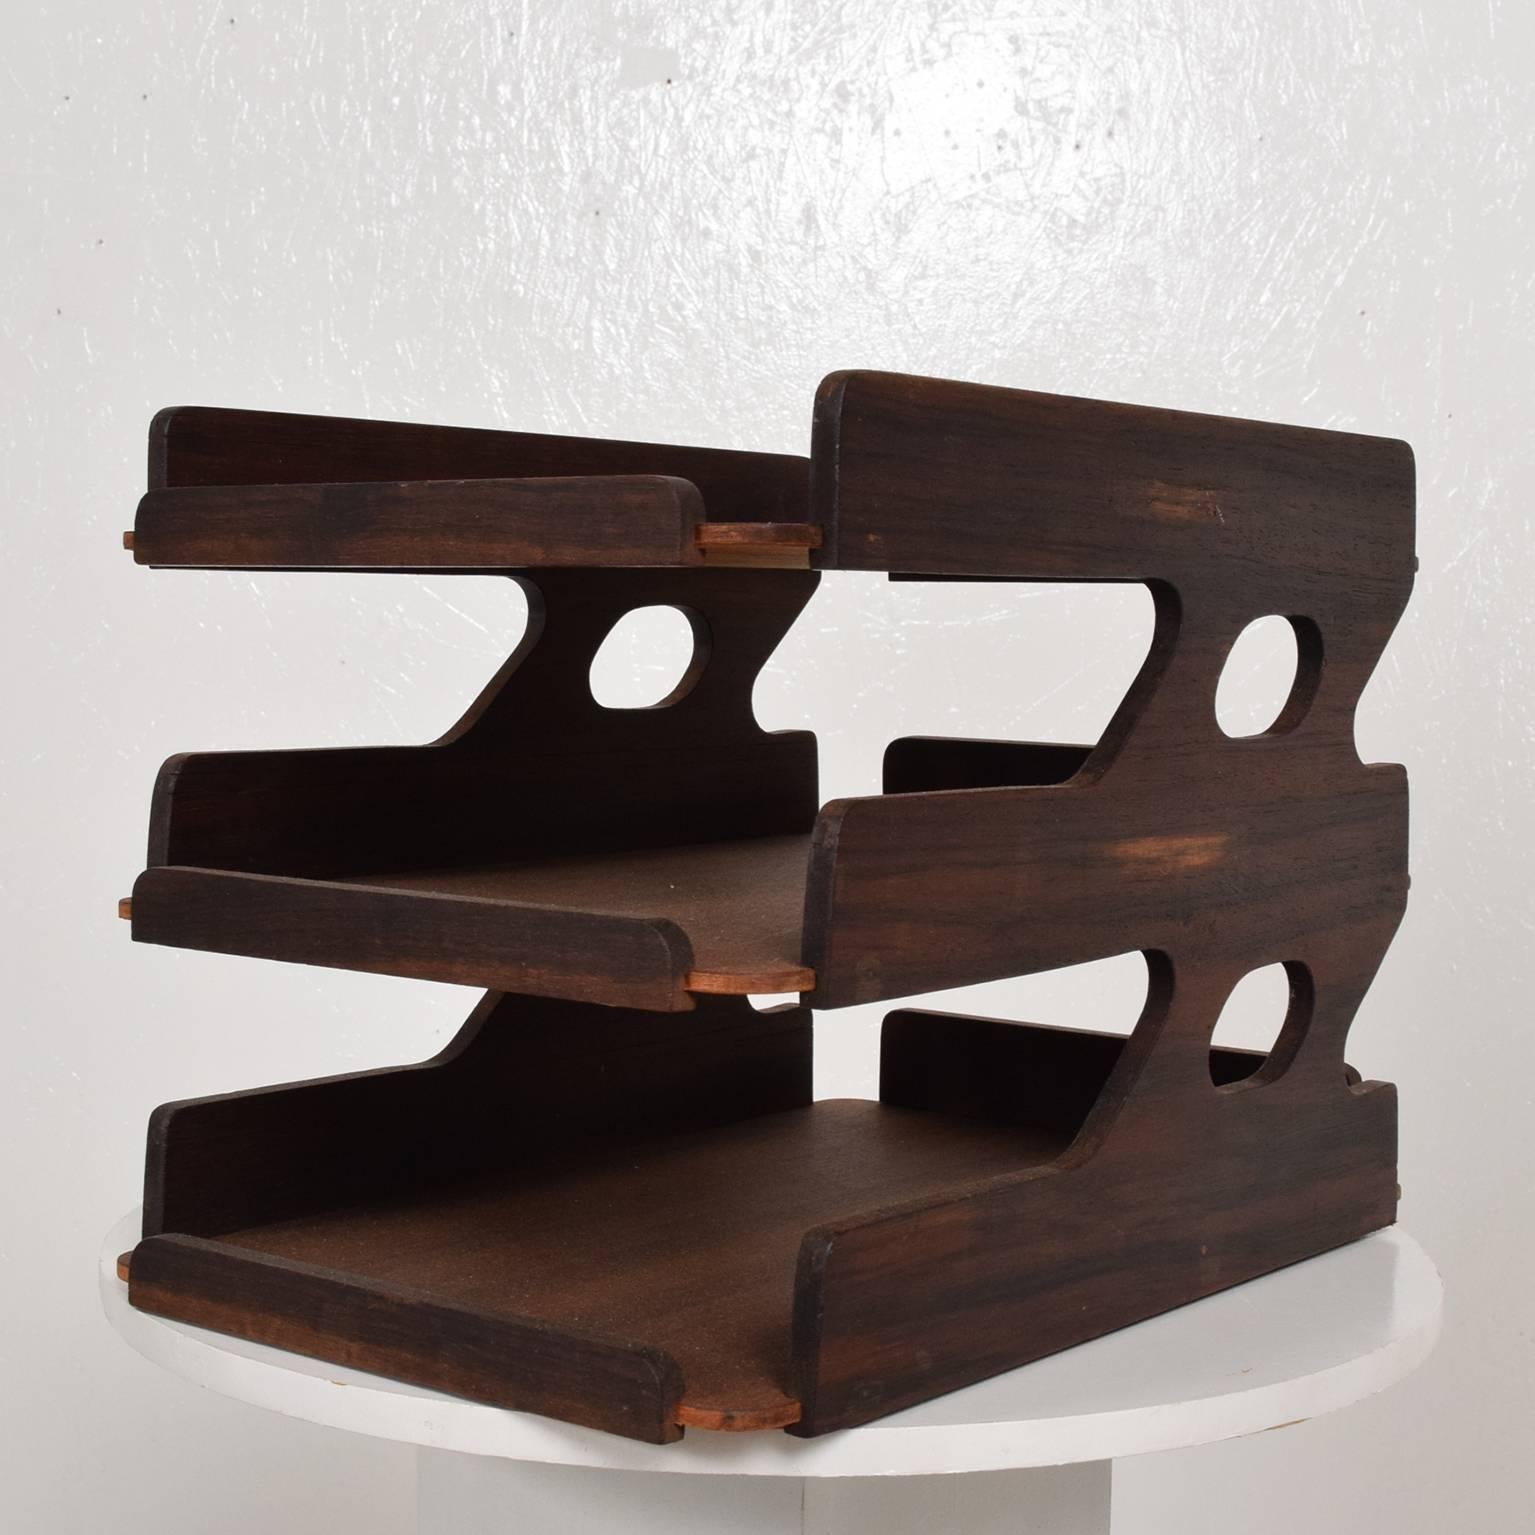 Miid-Century Modern Rosewood Office Tray Desk Accessory 1